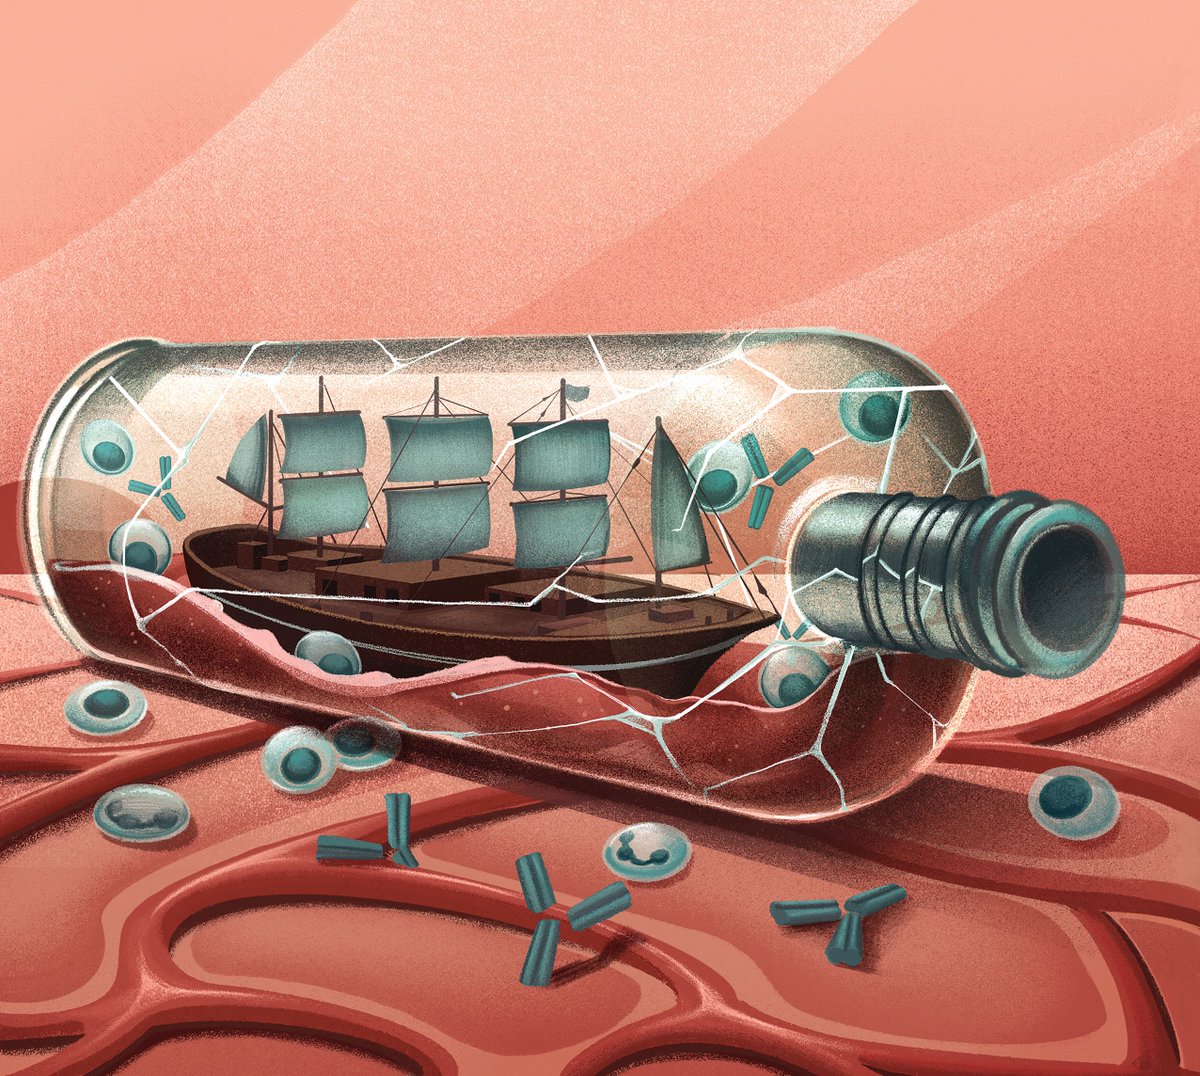 We are delighted to present a NEW SERIES of Reviews on #vasculitis thelancet.com/series/vasculi… Free to read with reg on lancet.com until May 1st Artwork by Chiara Vercesi #VasculitisBCN2024